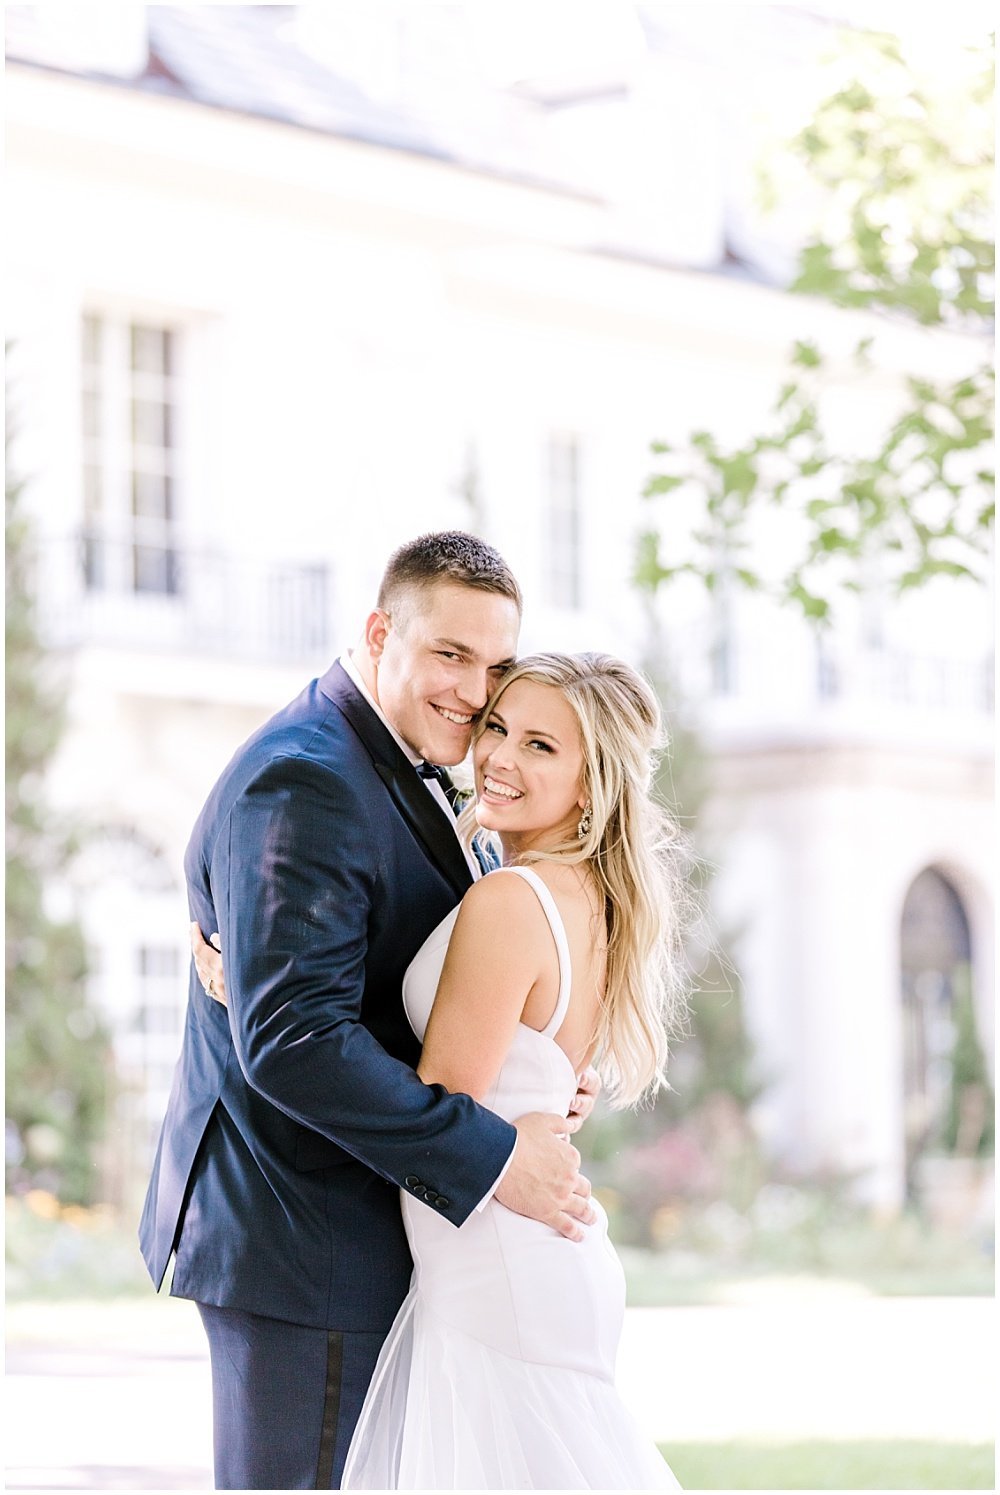 NFL-Player-Nick-Martin-Indianapolis-Indiana-Wedding-The-Knot-Featured-Jessica-Dum-Wedding-Coordination-photo__0013